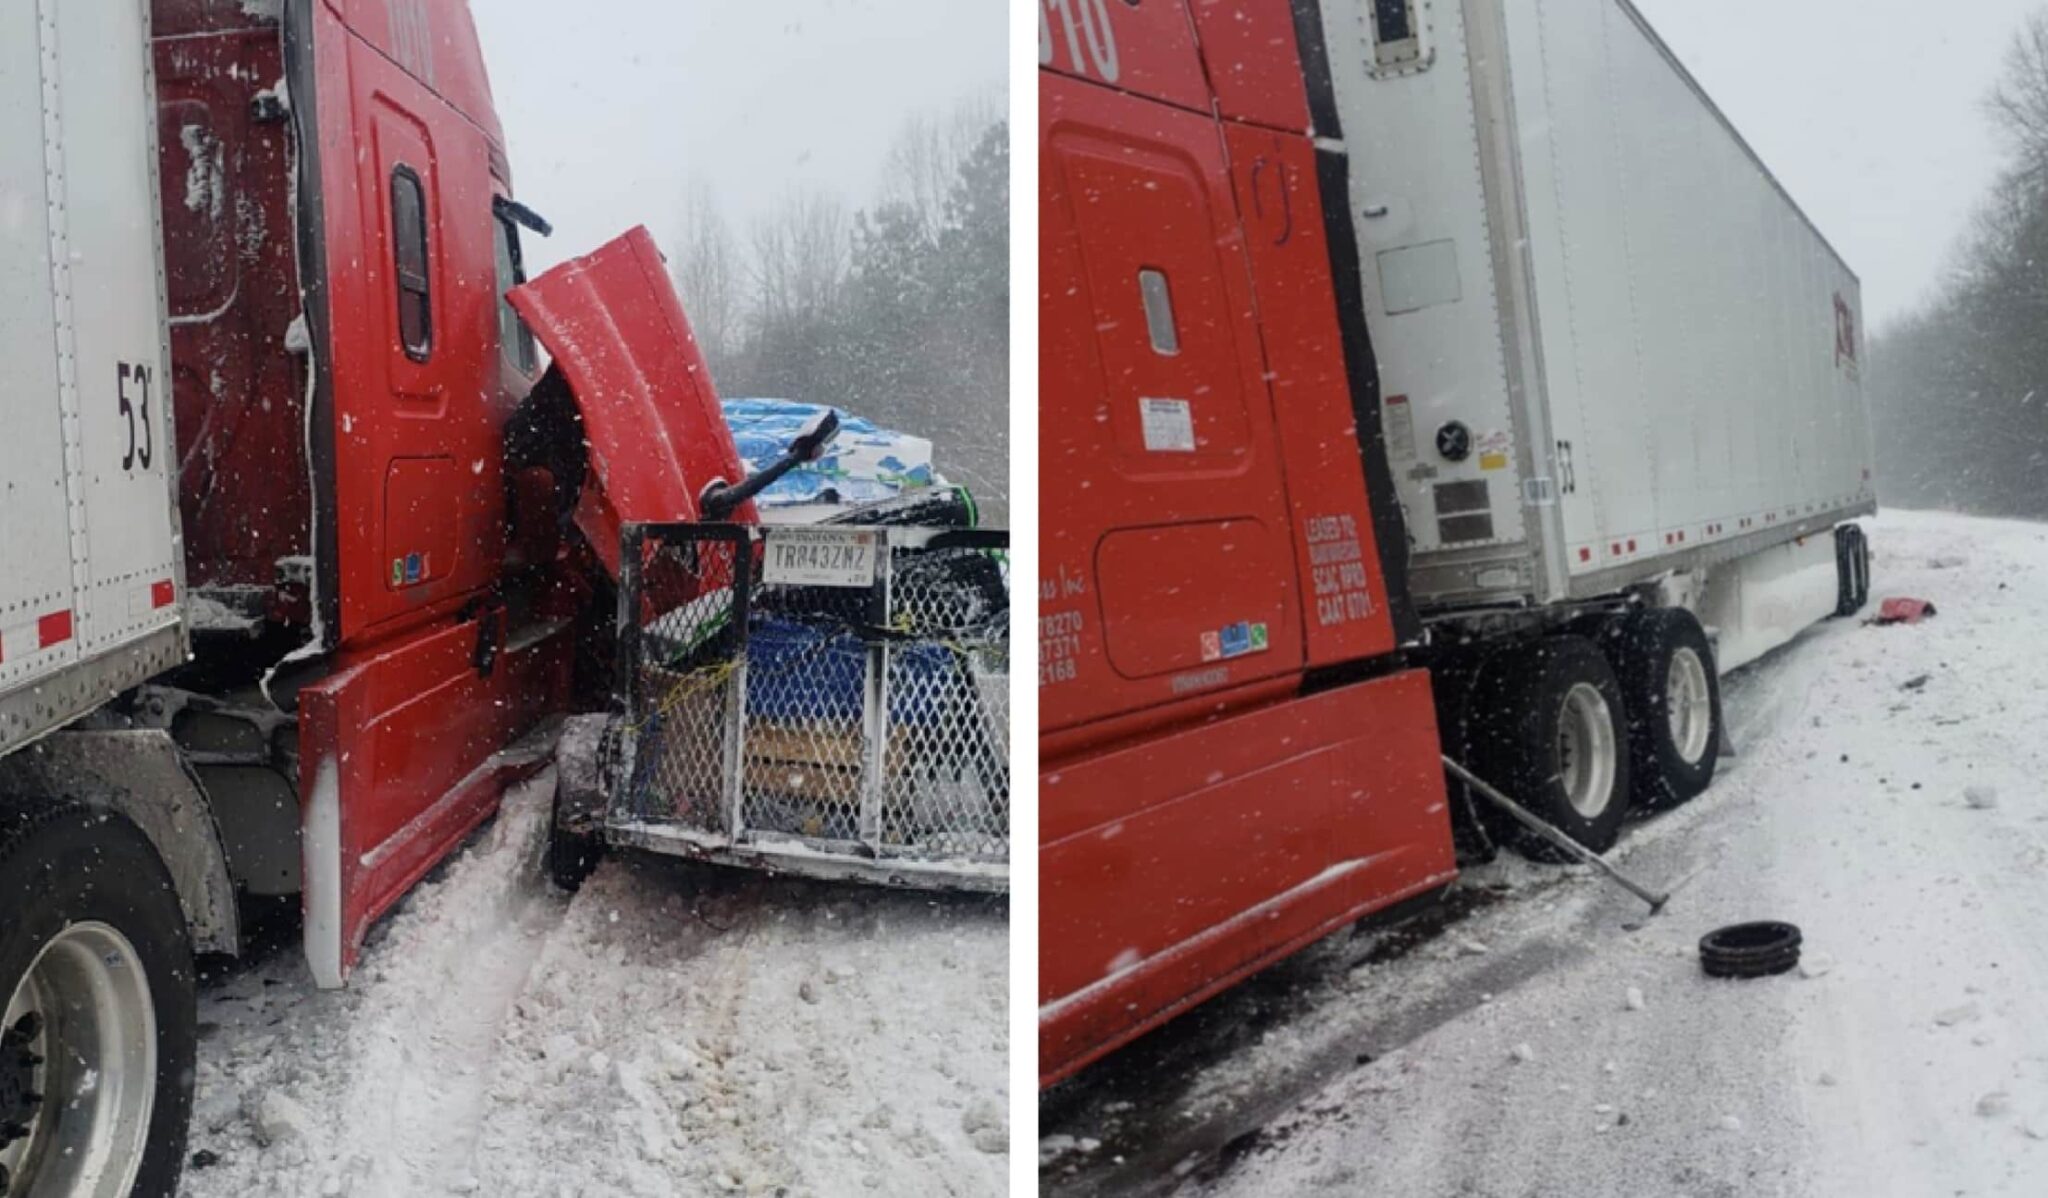 Crash scene of a semi-truck that collided with another semi-truck and a third vehicle pulling a trailer